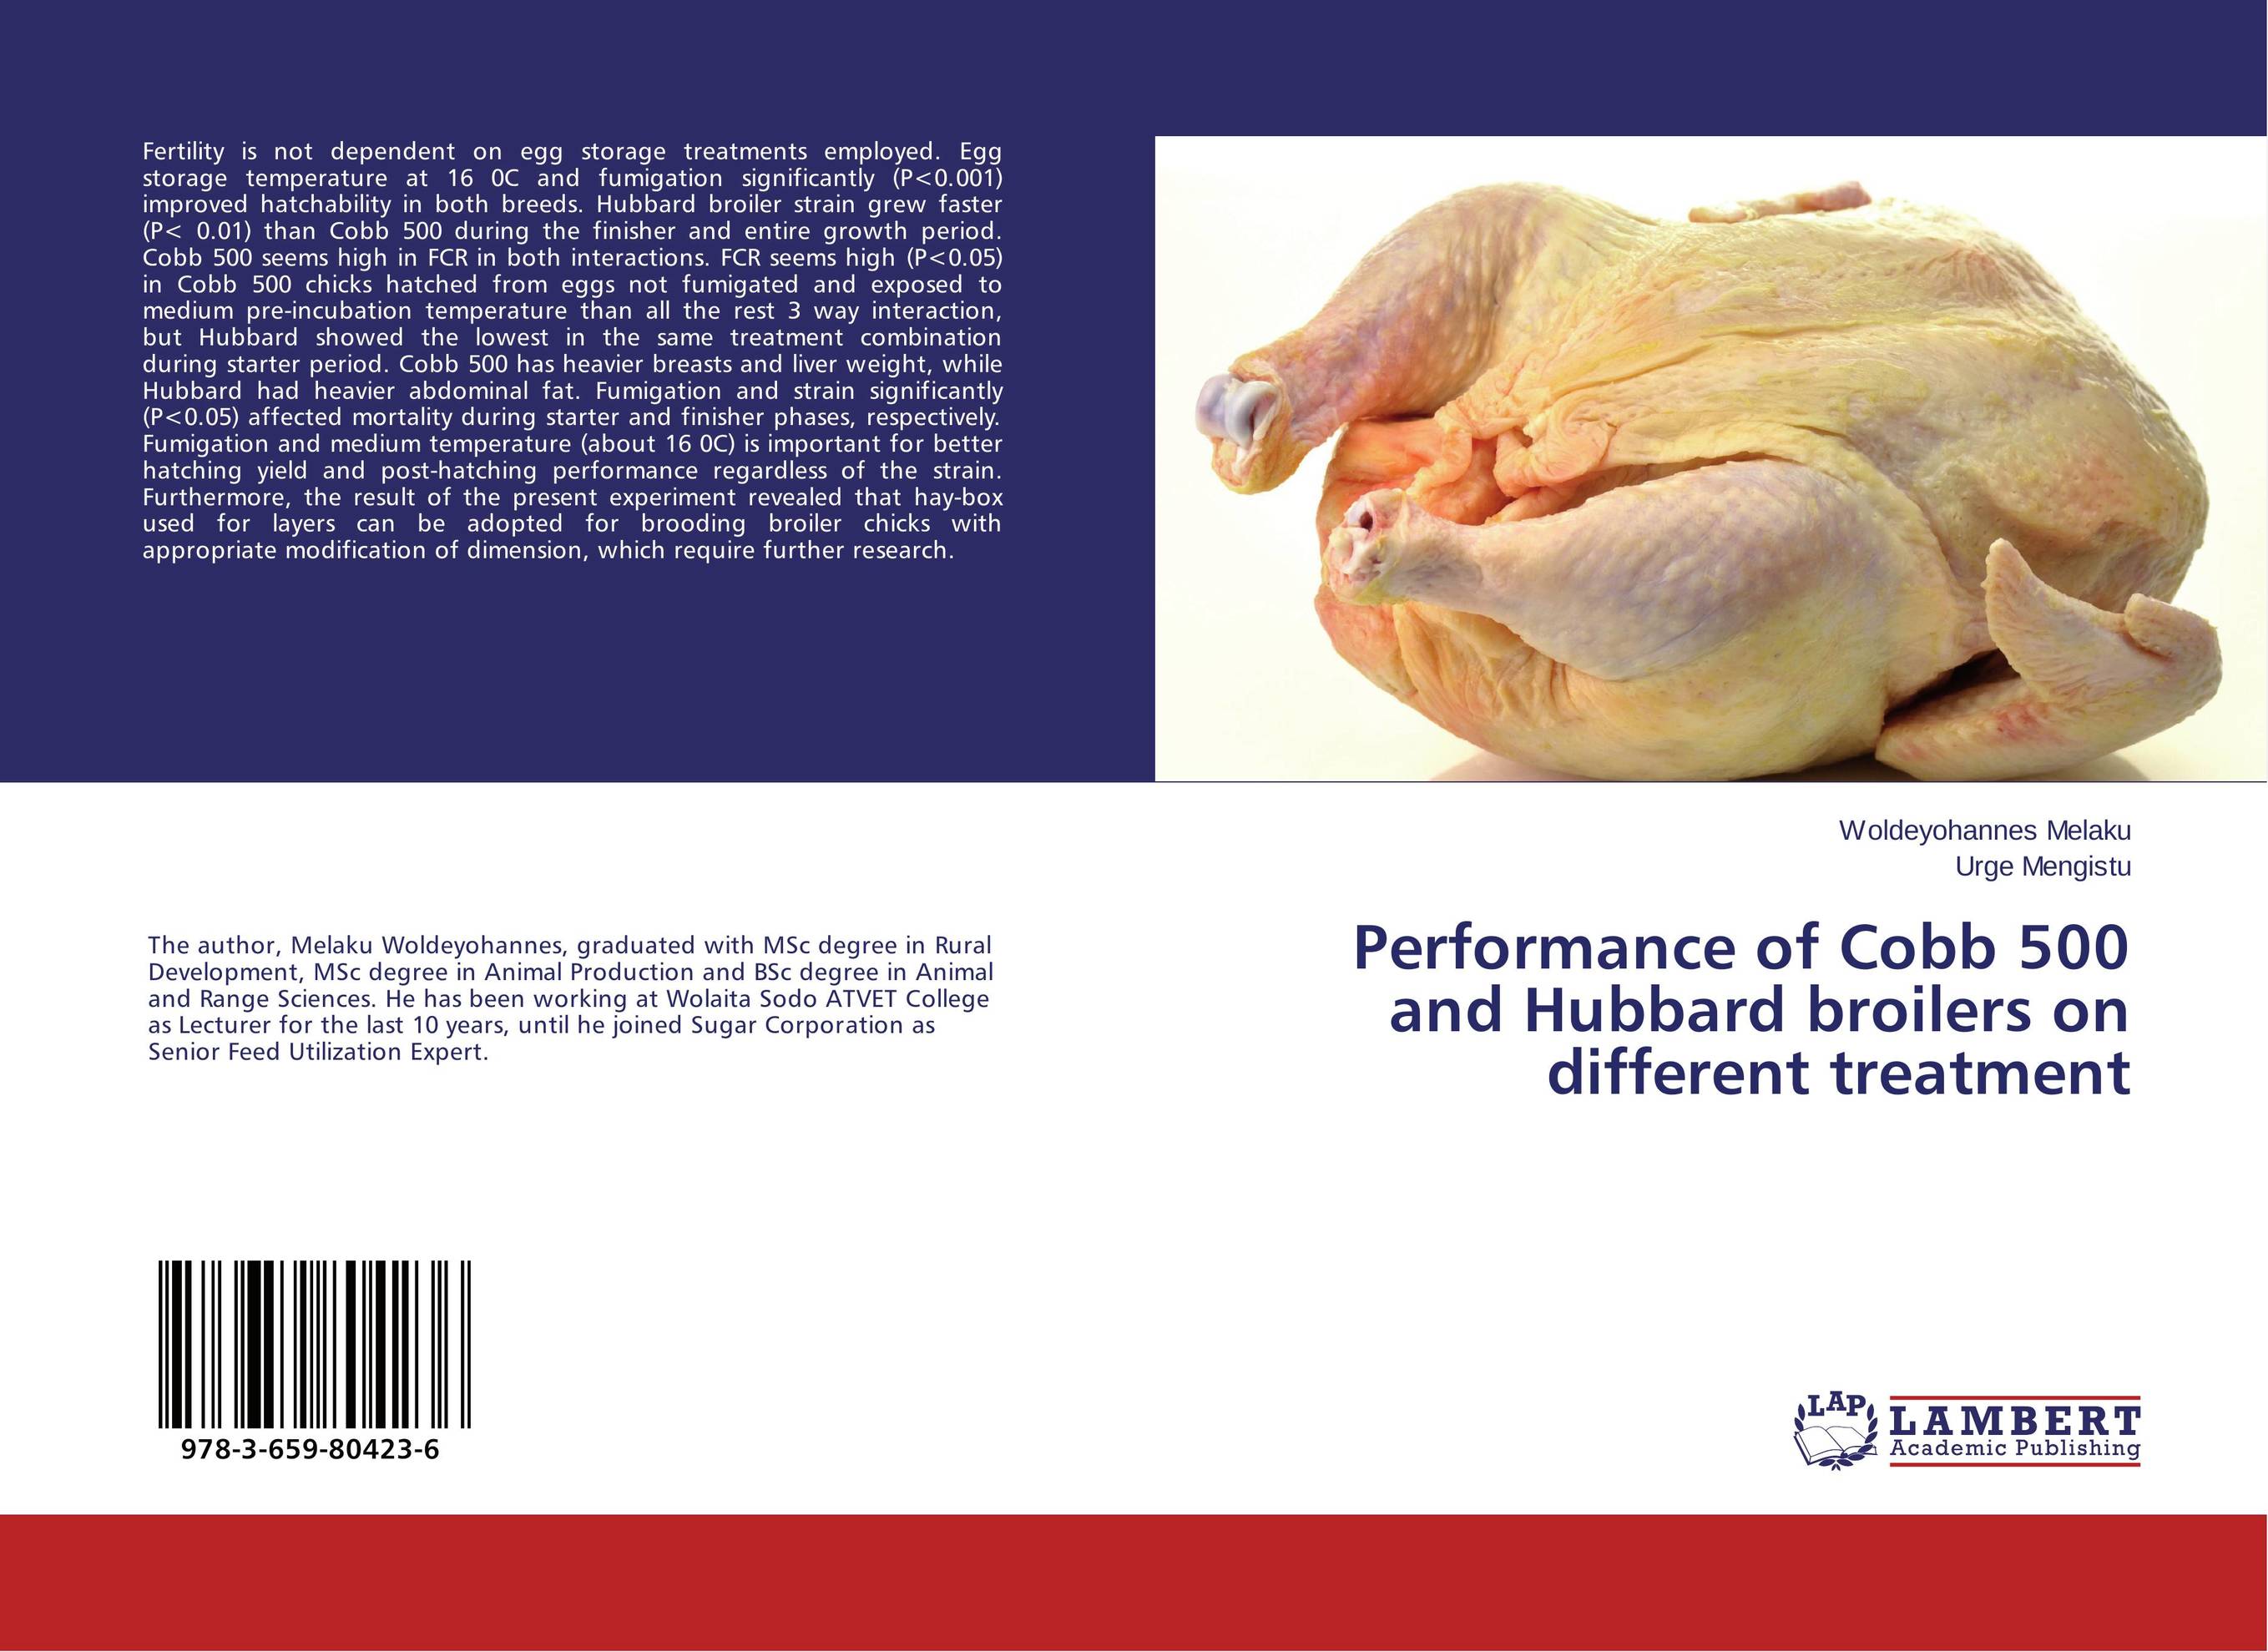 Performance of Cobb 500 and Hubbard broilers on different treatment. 